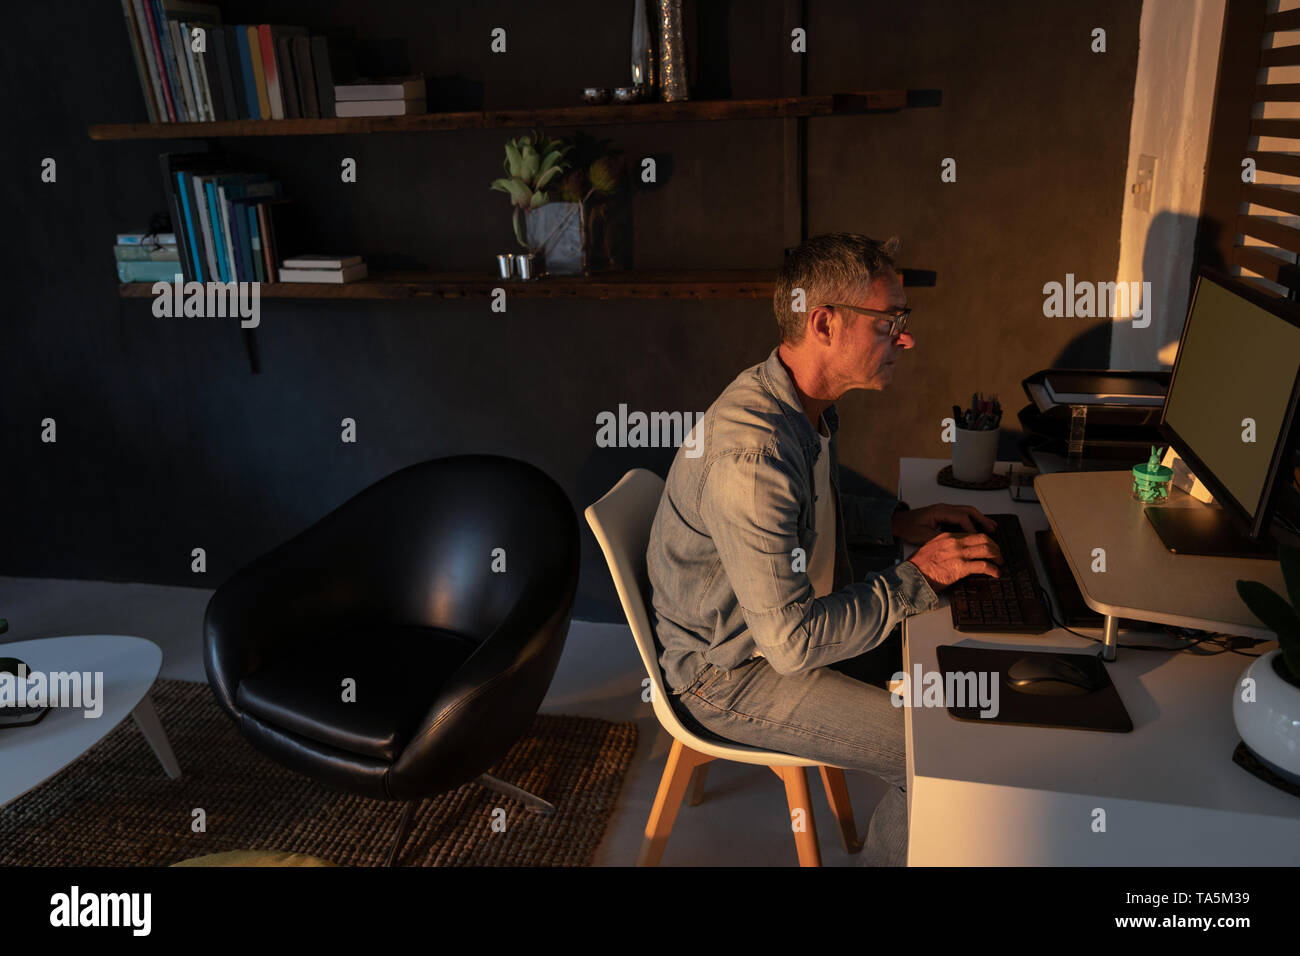 Man using computer in living room Banque D'Images